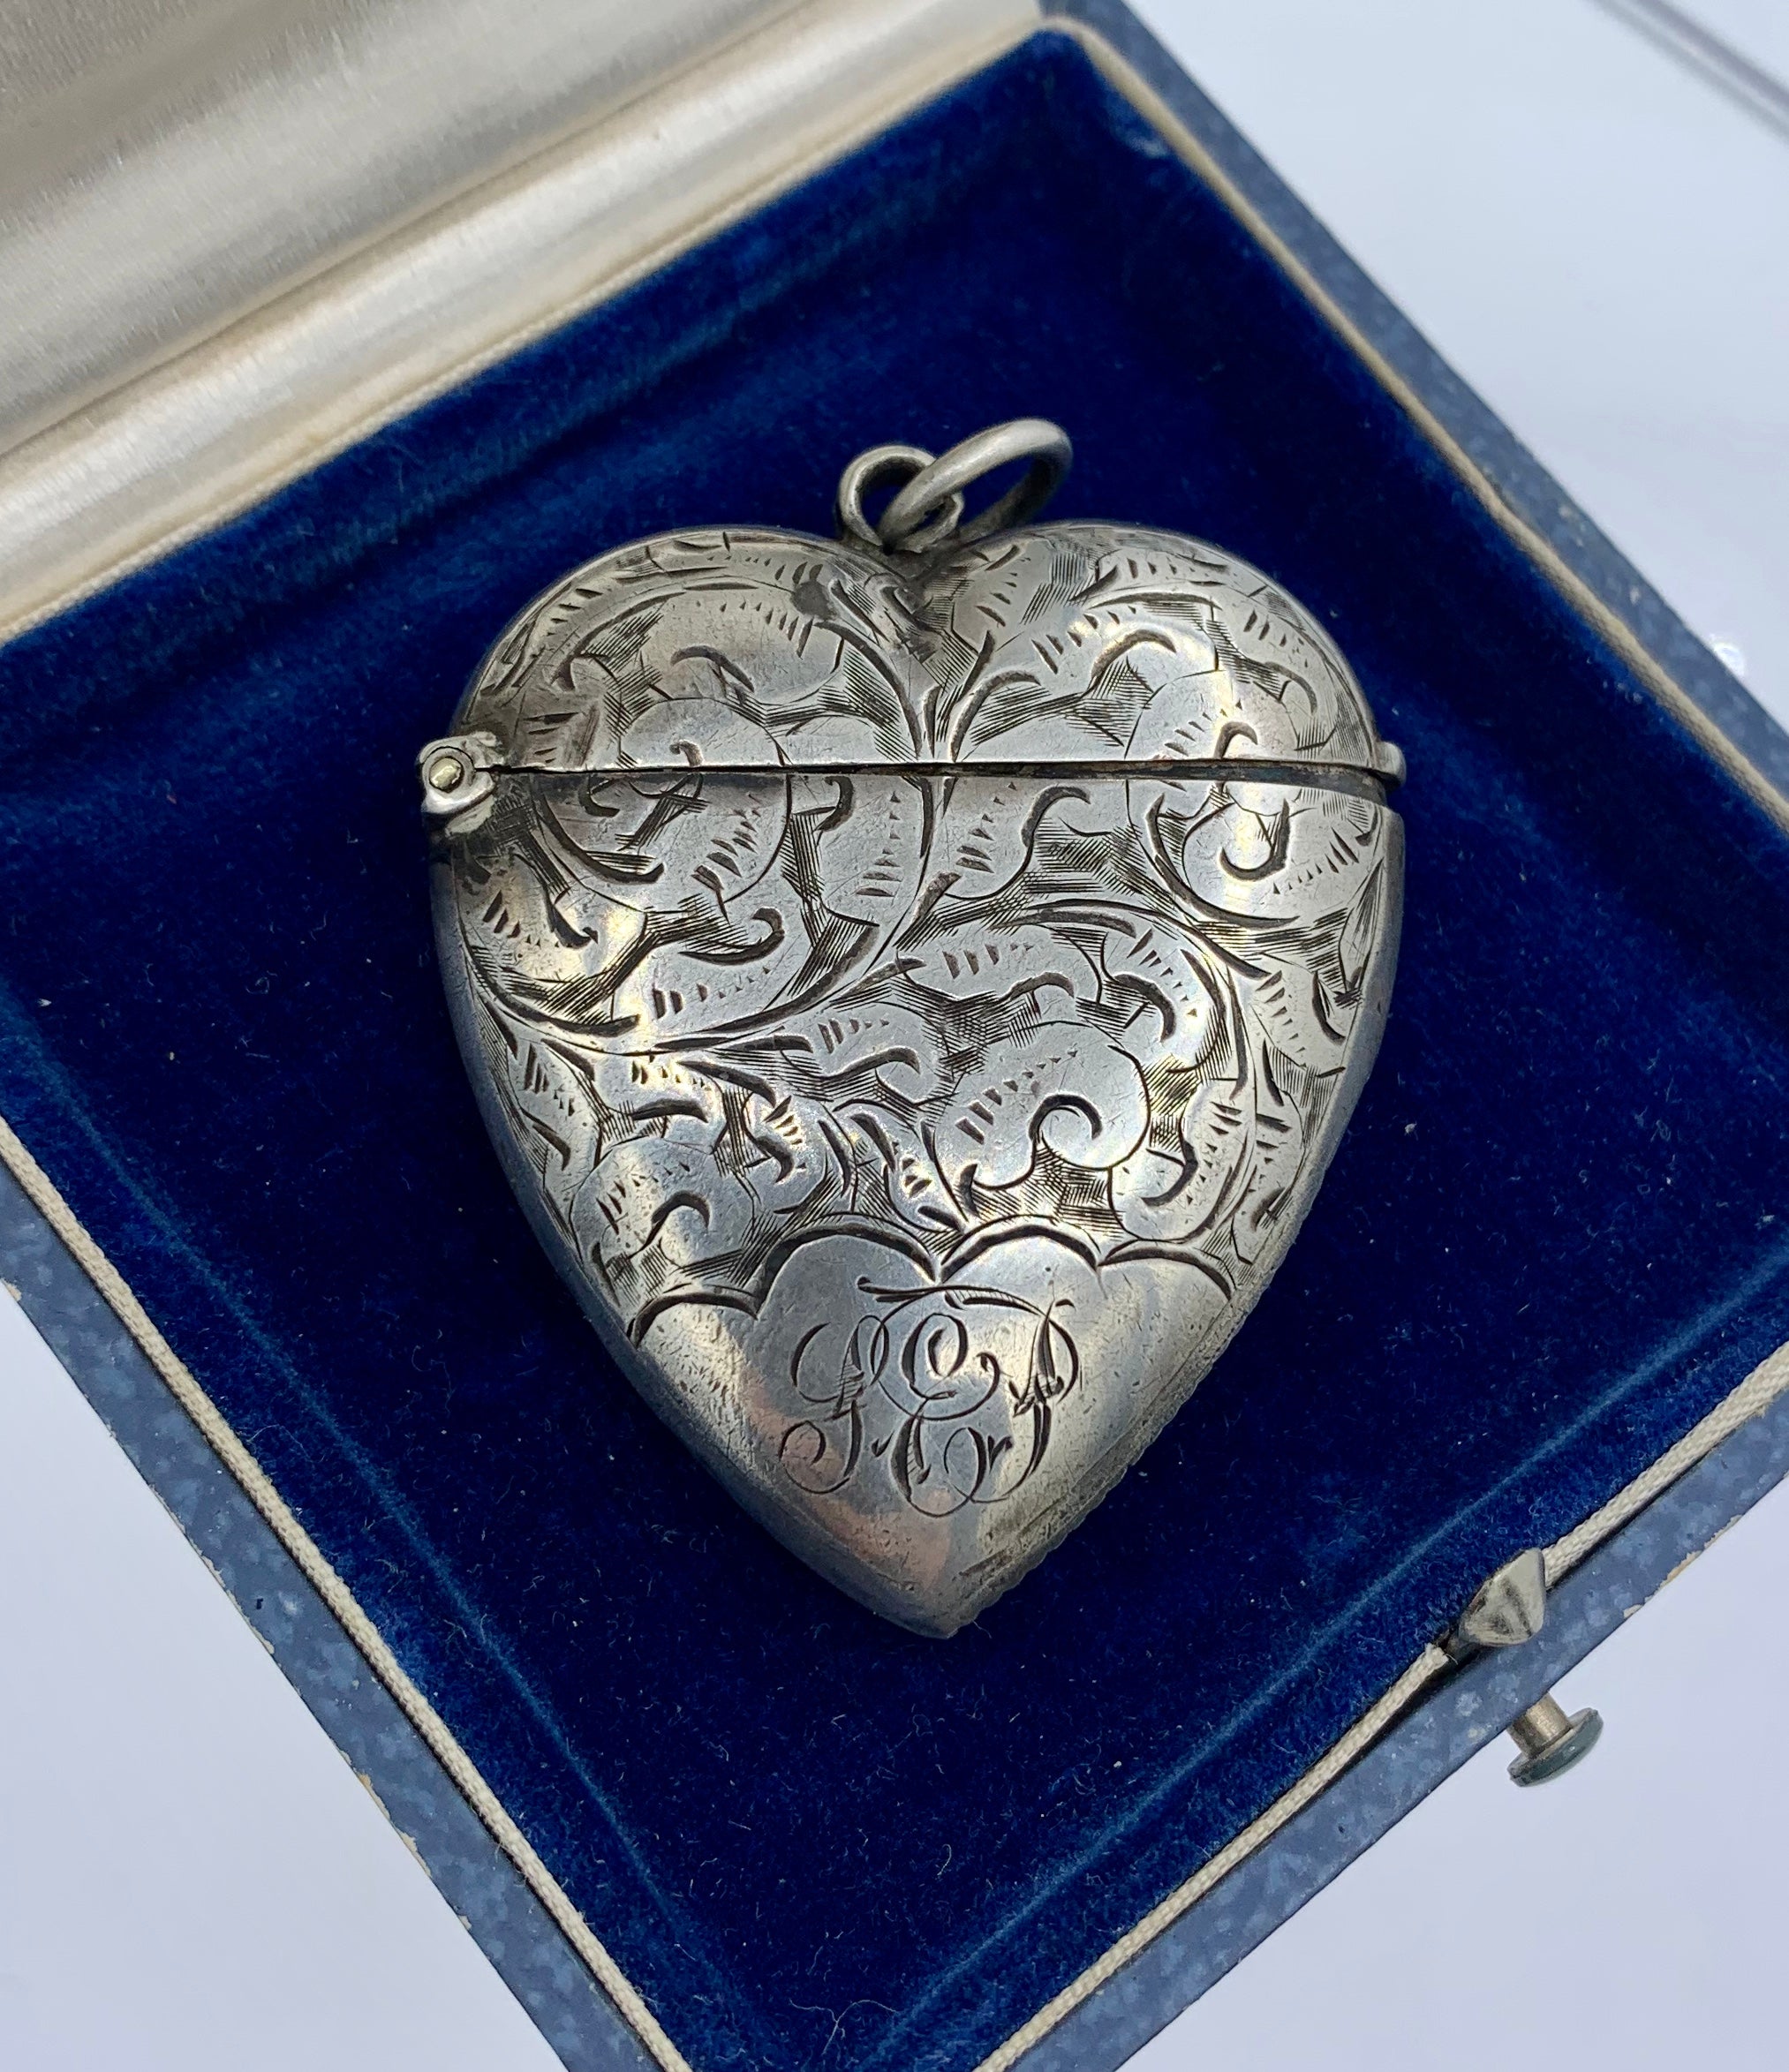 THIS IS A WONDERFUL ANTIQUE VICTORIAN HEART SHAPE LOCKET, MATCH HOLDER STRIKER OR PERFUME VINAIGRETTE BY THE ESTEEMED BRITISH SILVERSMITH WILLIAM HAIR HASELER.   HASELER WAS FAMED FOR PARTNERING WITH LIBERTY & CO. OF LONDON AND PRODUCING THE WORKS